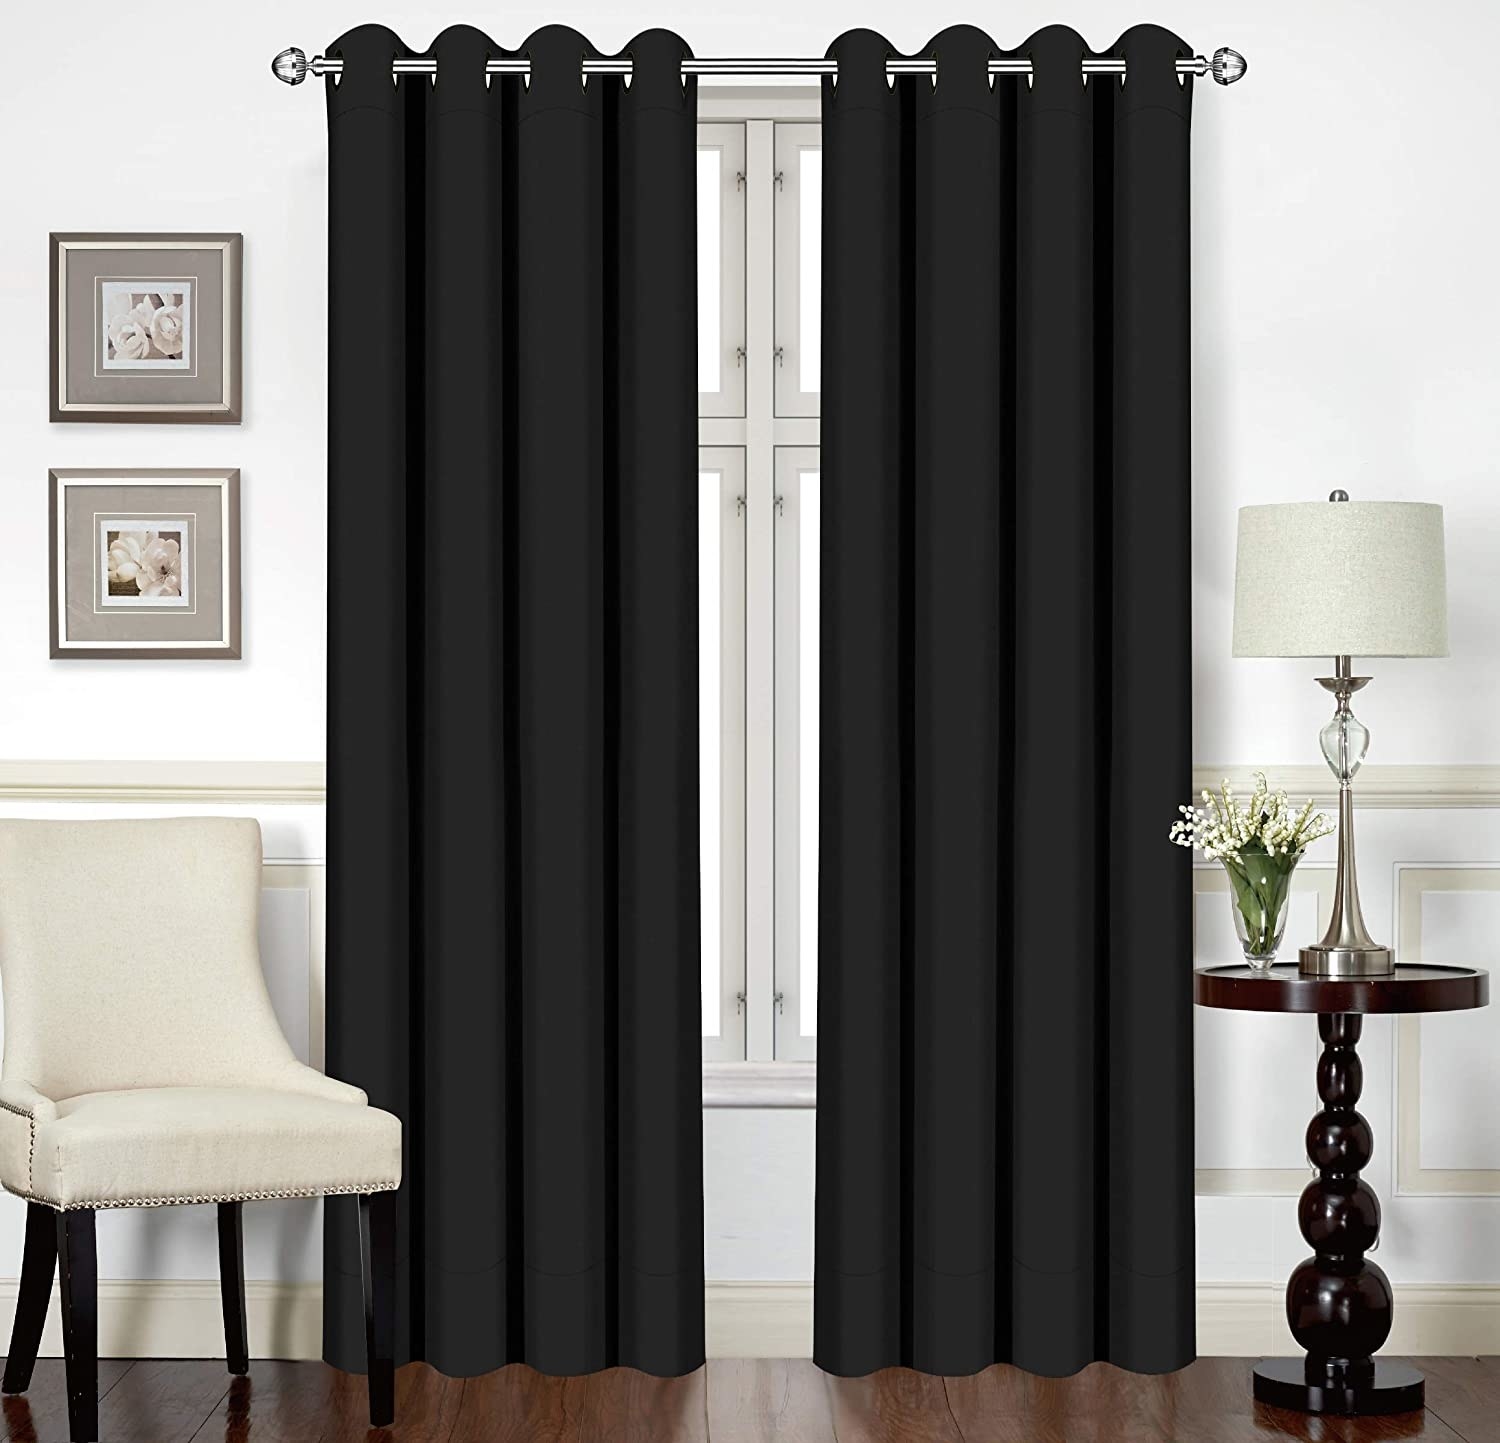 A pair of curtains cover a window